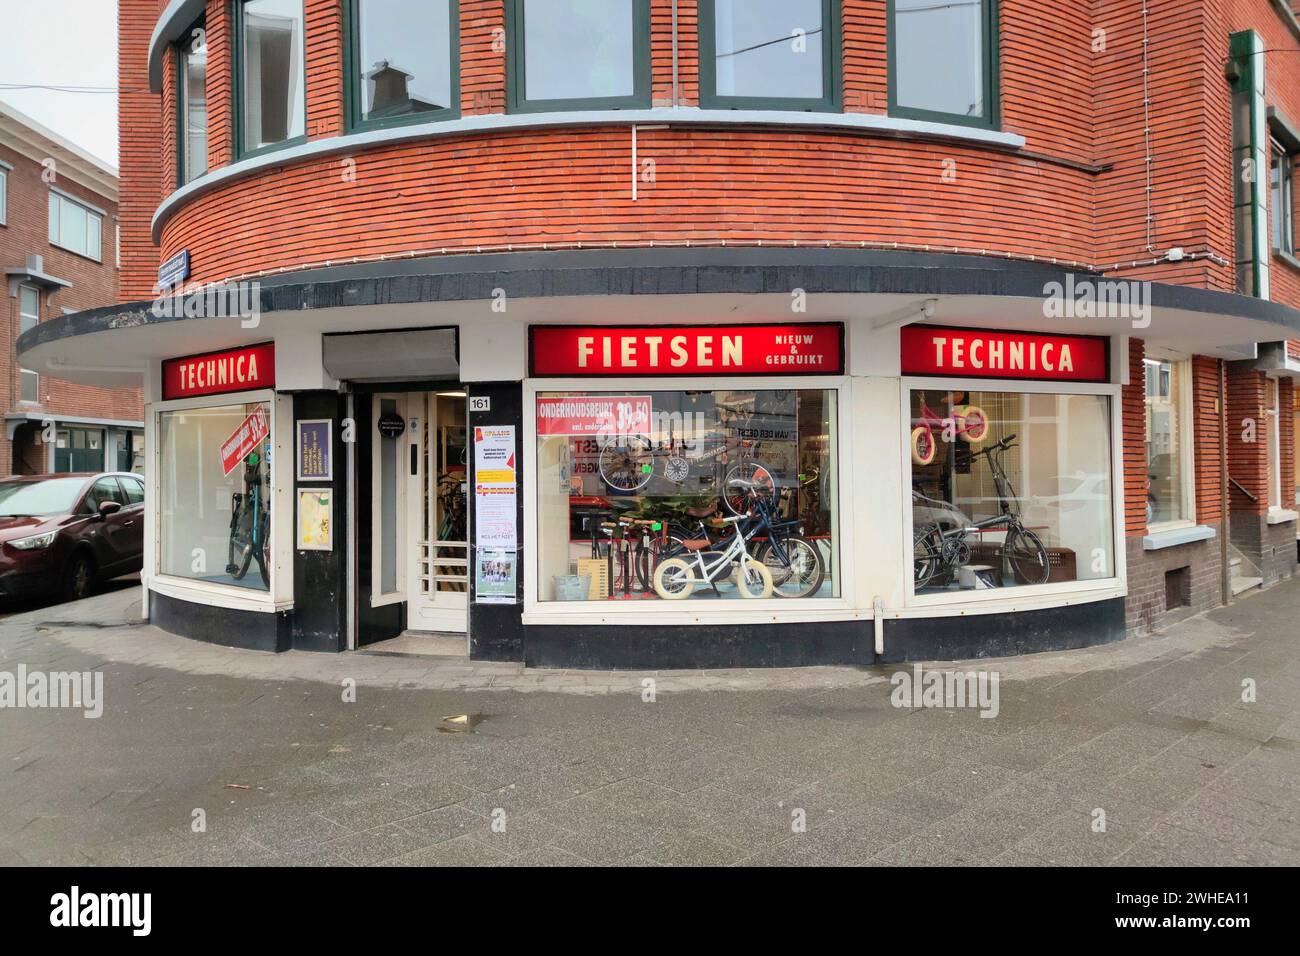 Bicycle shop in the village of Scheveningen, near the city of The Hague, Netherlands Stock Photo